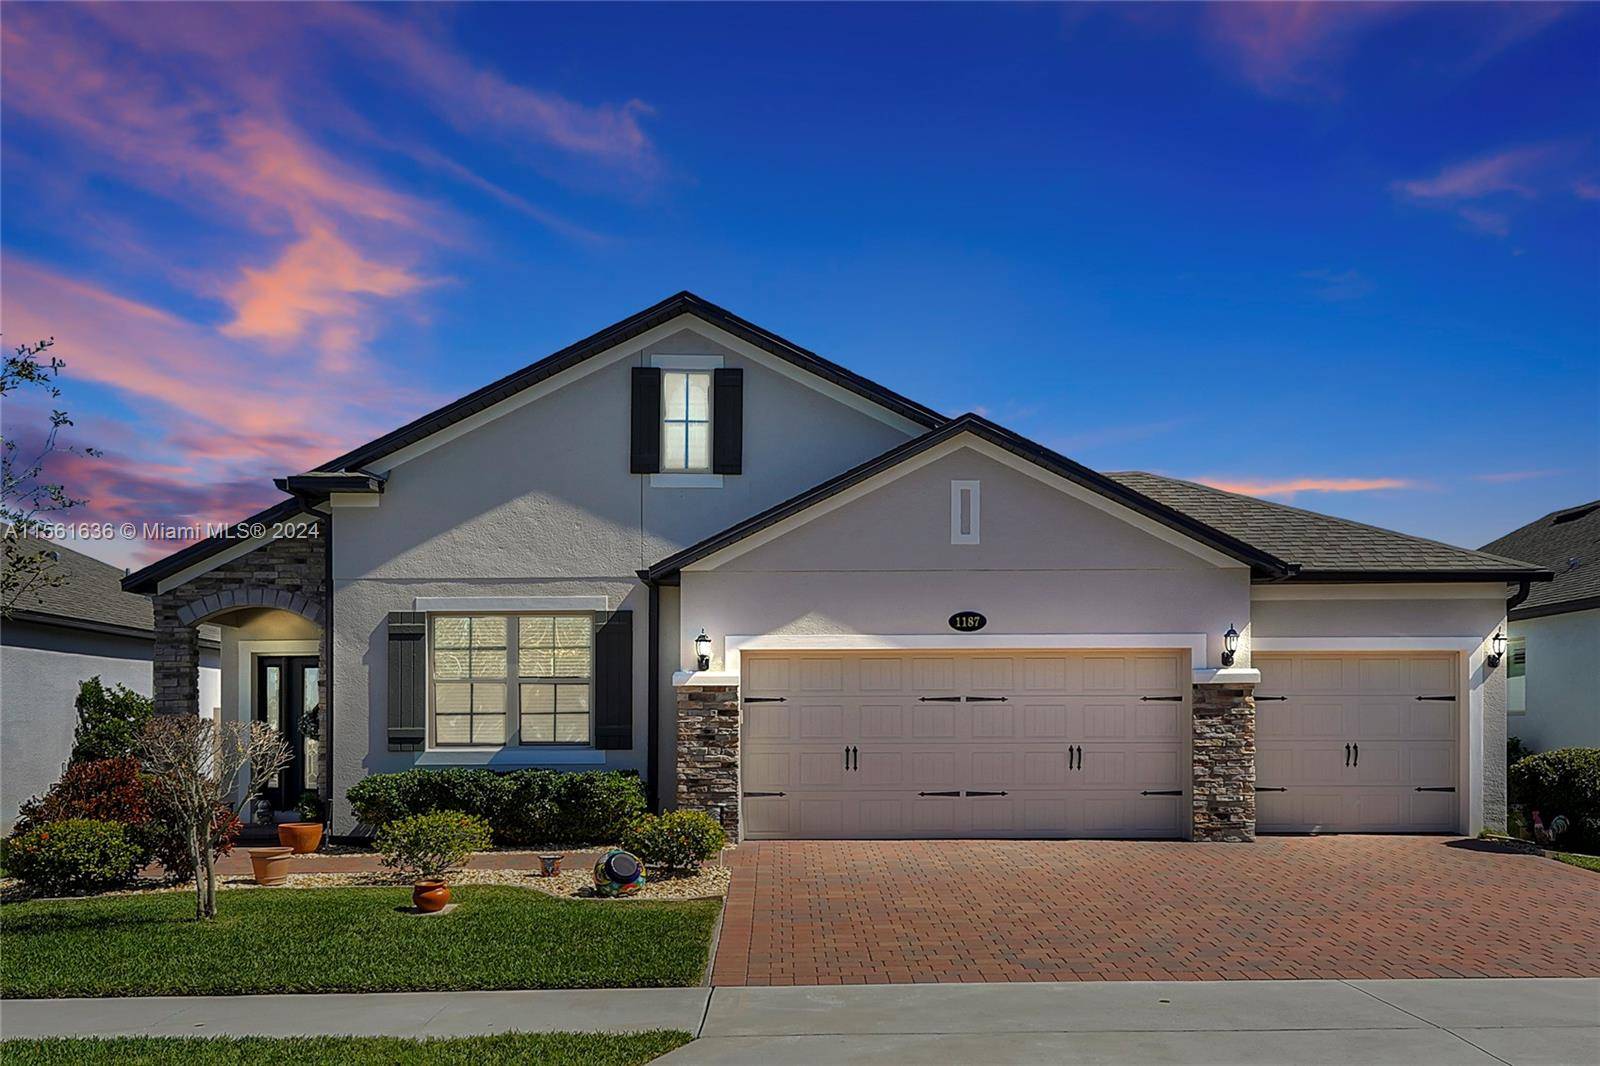 This immaculate home is ready for you to move in and enjoy.